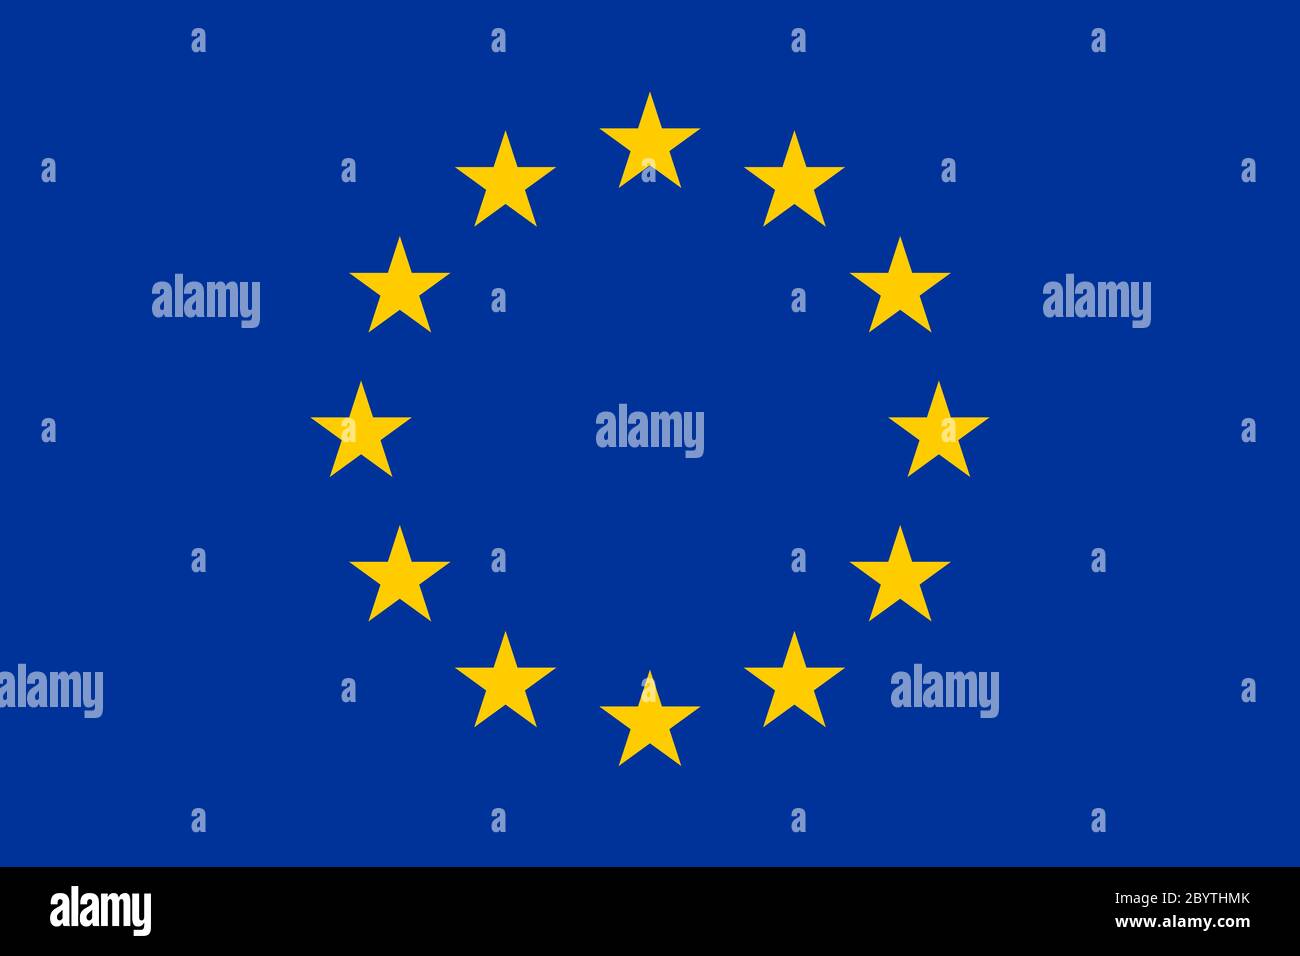 Flag of European Union, EU. Twelve gold stars on blue background. Official size and colors. Stock Vector